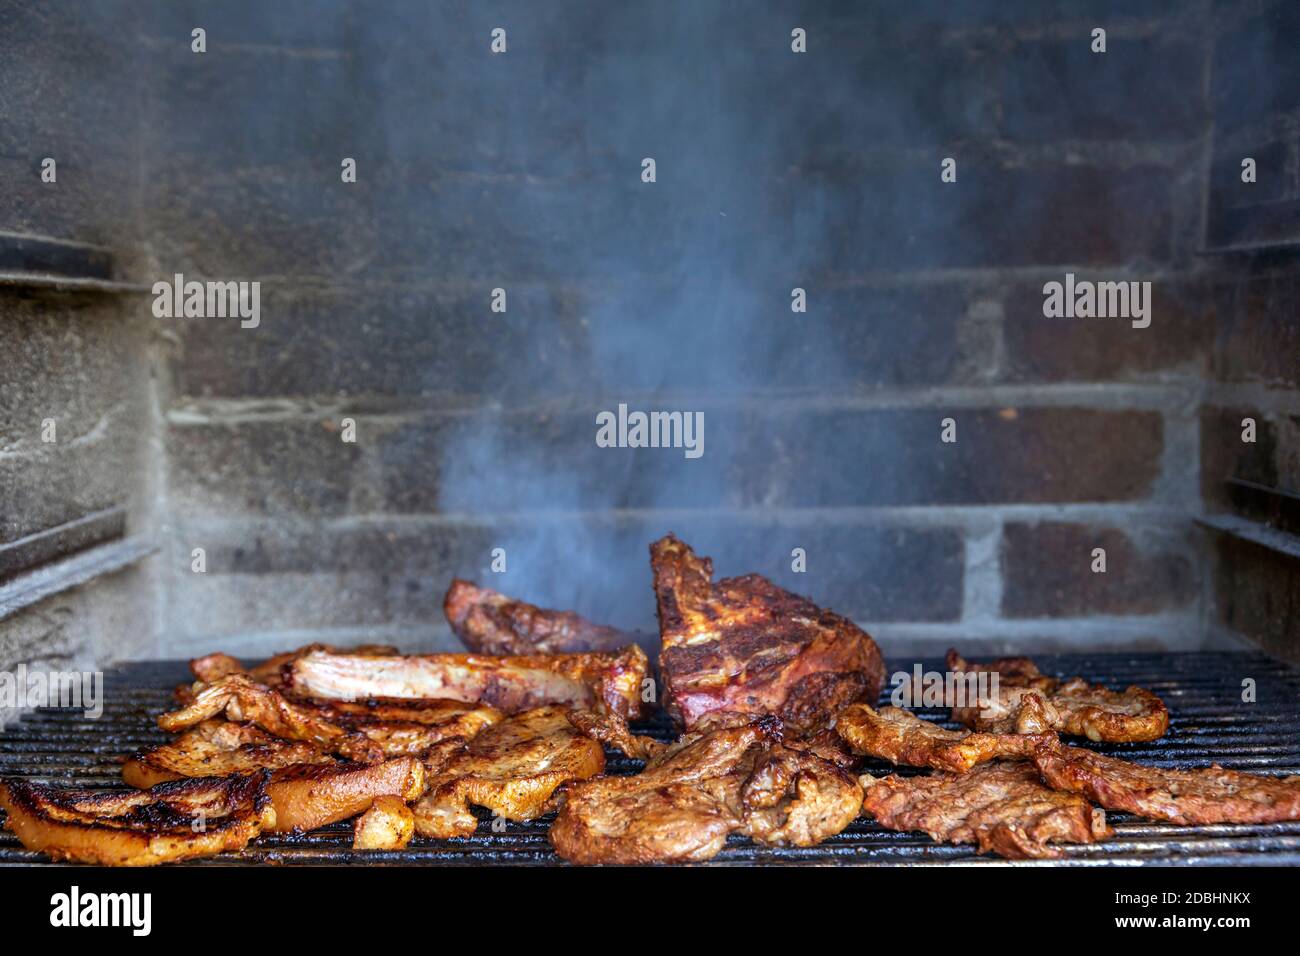 Meat on the barbecue grill, beef steak Stock Photo